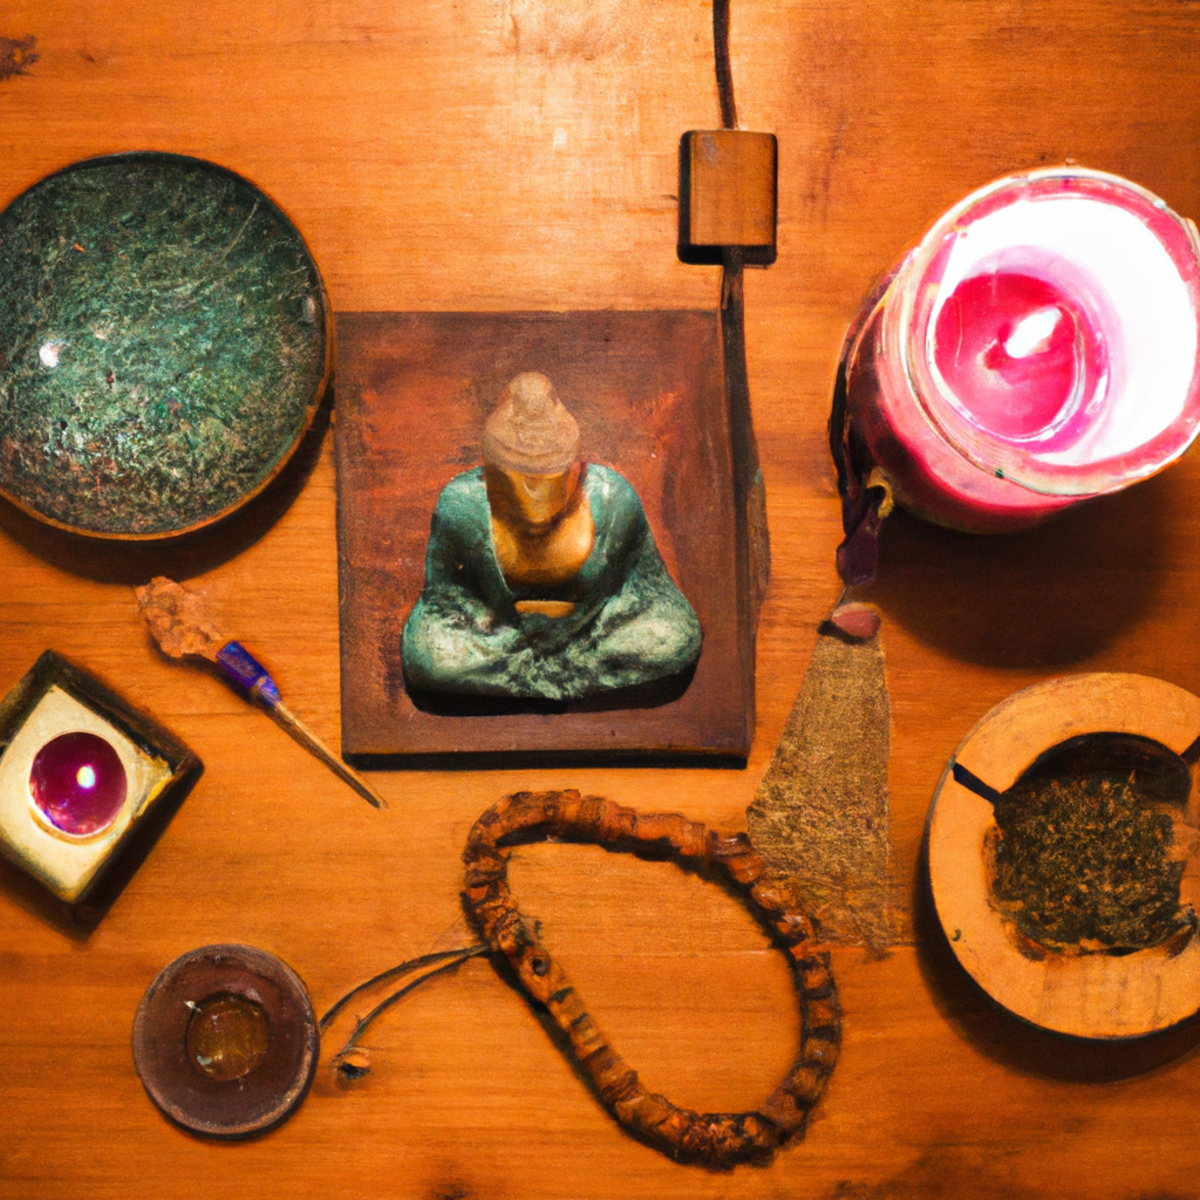 The photo features a wooden table with a small Buddha statue placed in the center. Surrounding the statue are various meditation objects, including a set of prayer beads, a small incense burner, and a meditation cushion. The soft glow of a candle illuminates the scene, creating a peaceful and calming atmosphere. The natural wood grain of the table adds to the organic and grounding feel of the photo. Overall, the image invites the viewer to take a moment to pause and find their own sense of inner peace and focus.